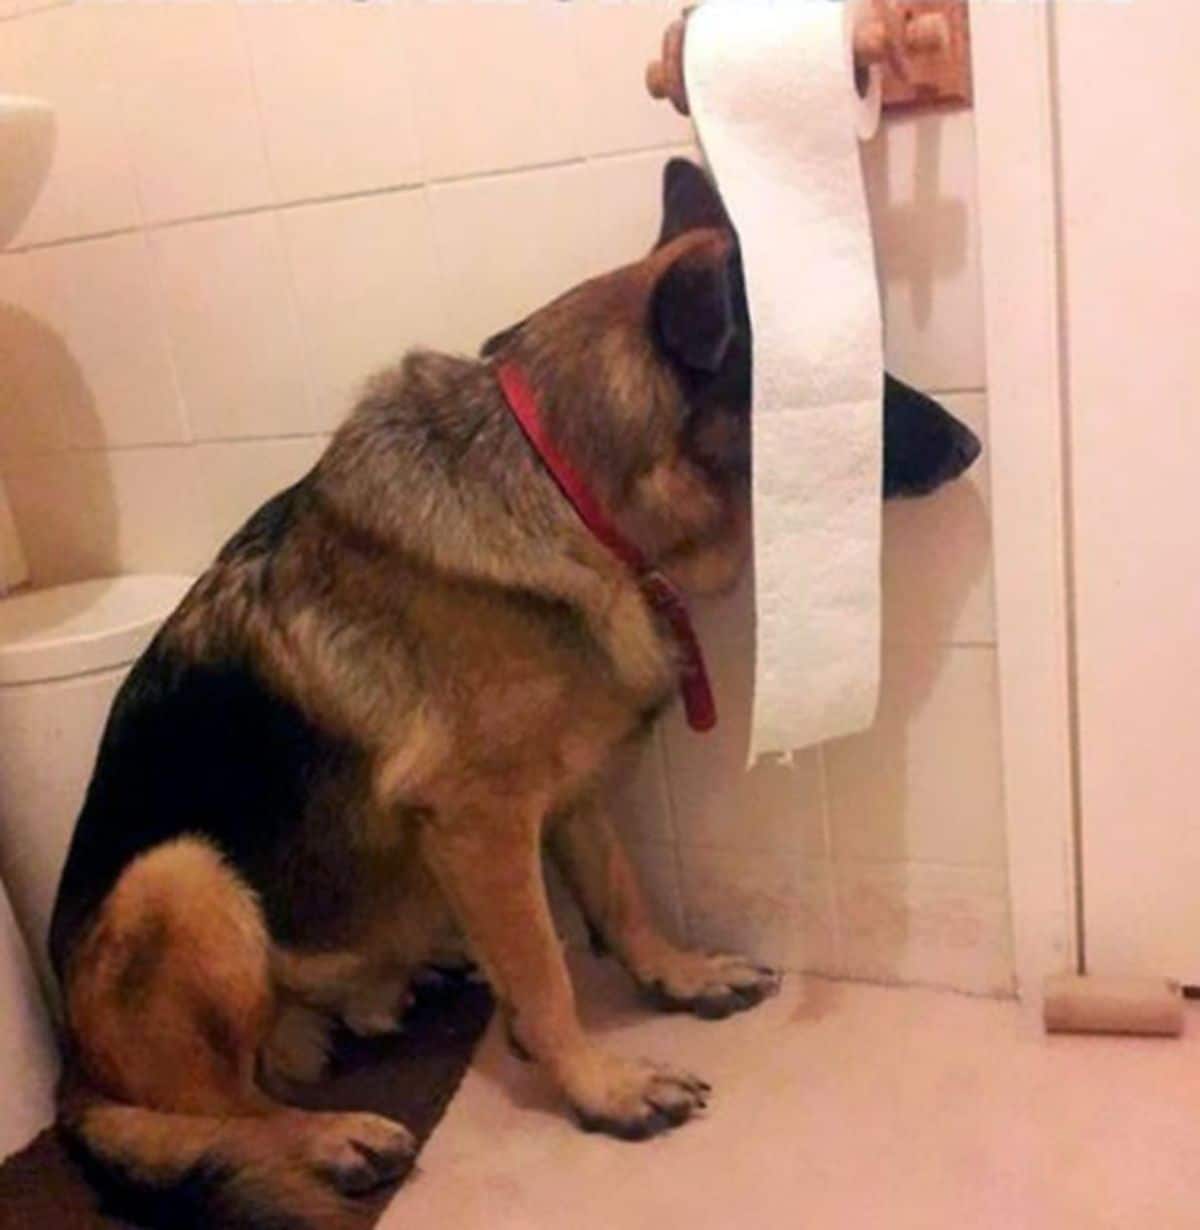 german shepherd sitting on the floor of a bathroom trying to hide the face behind a partially unrolled toilet paper roll hanging down